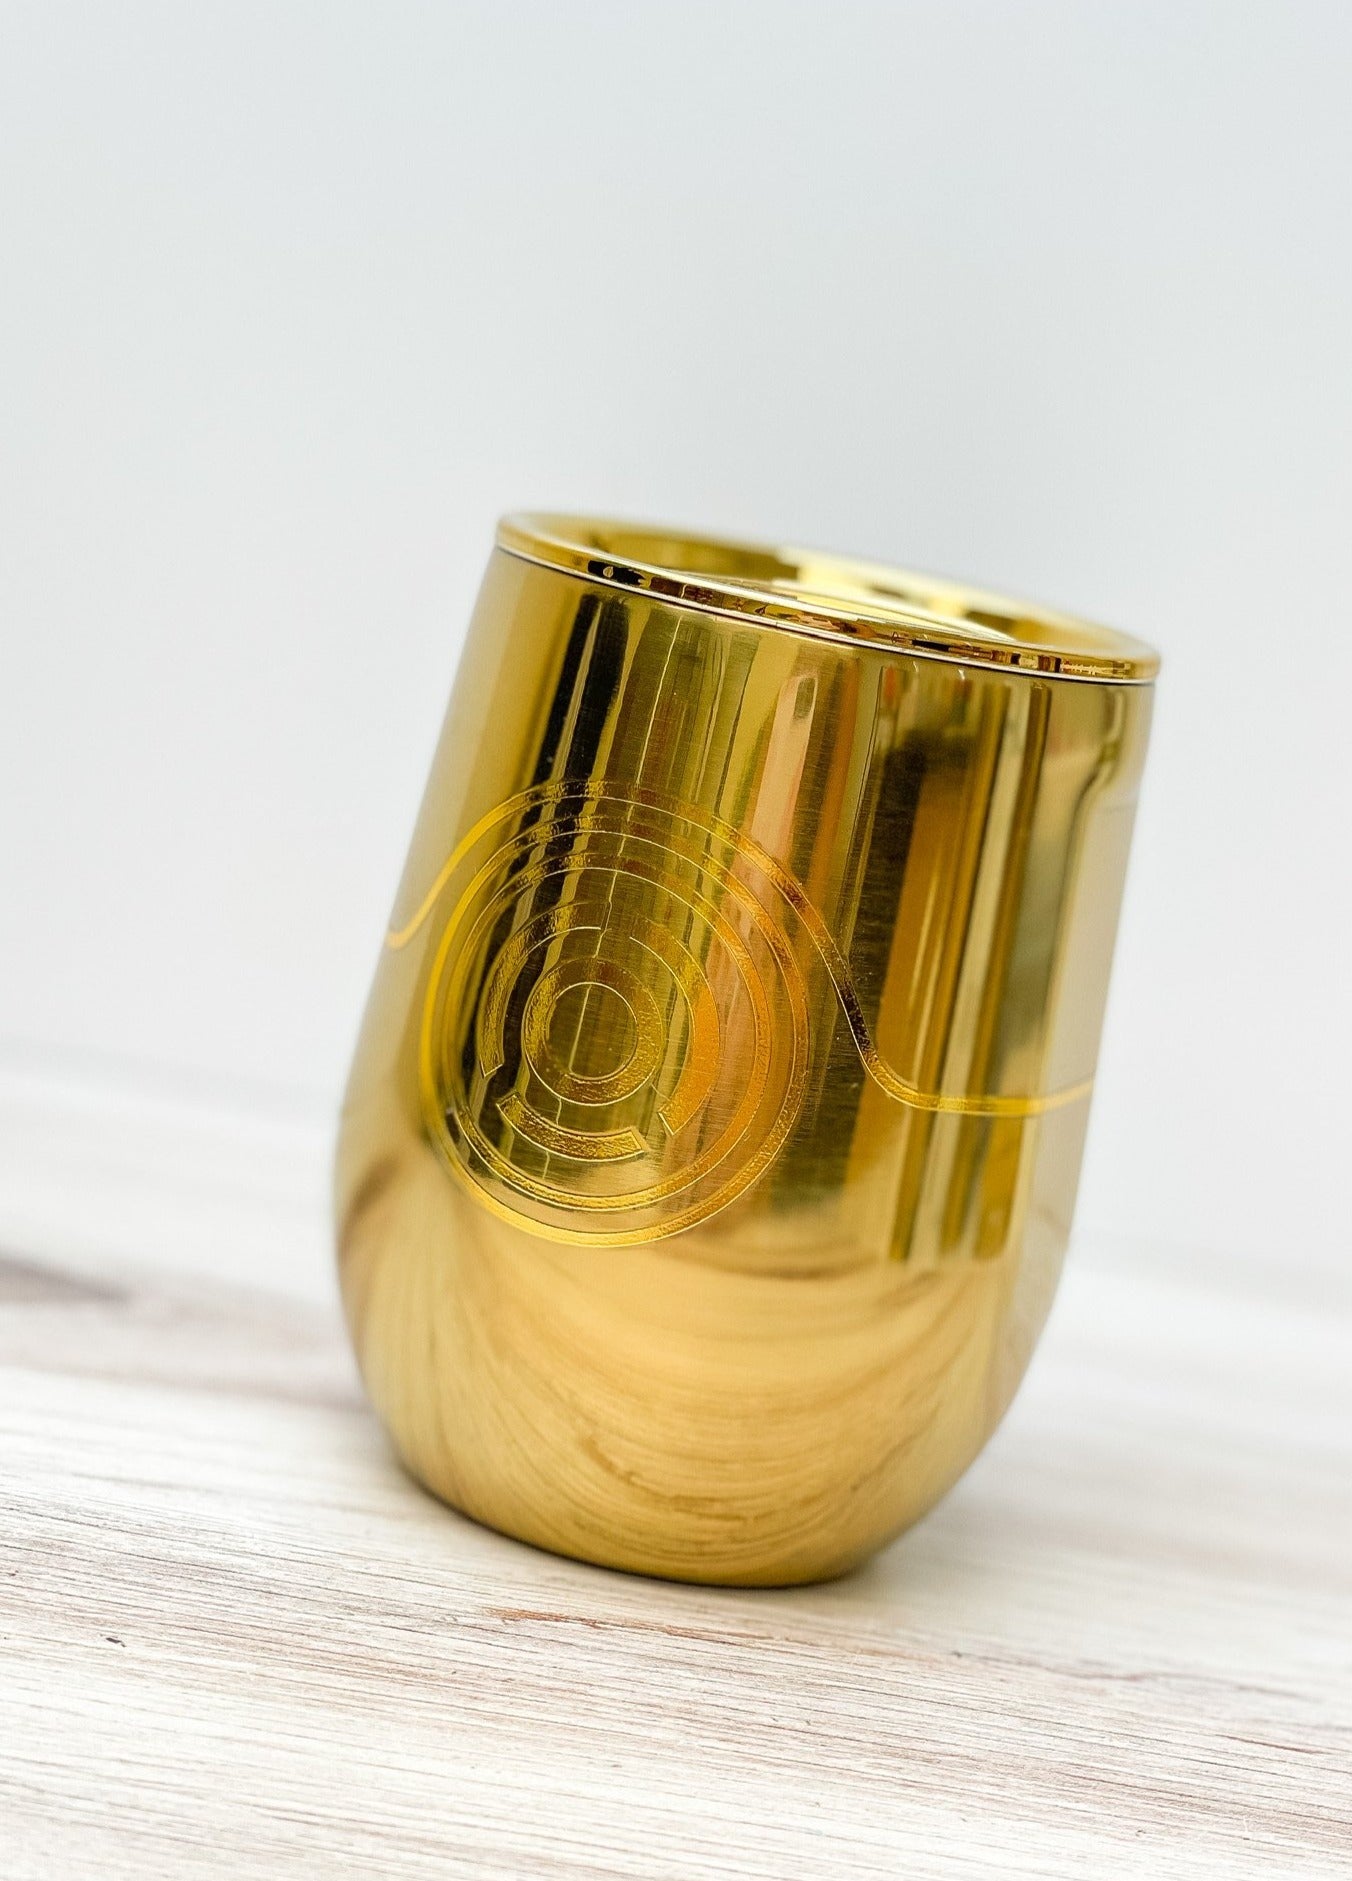 12 oz Stainless Steel Star Wars Stemless Tumbler by Corkcicle - C-3PO